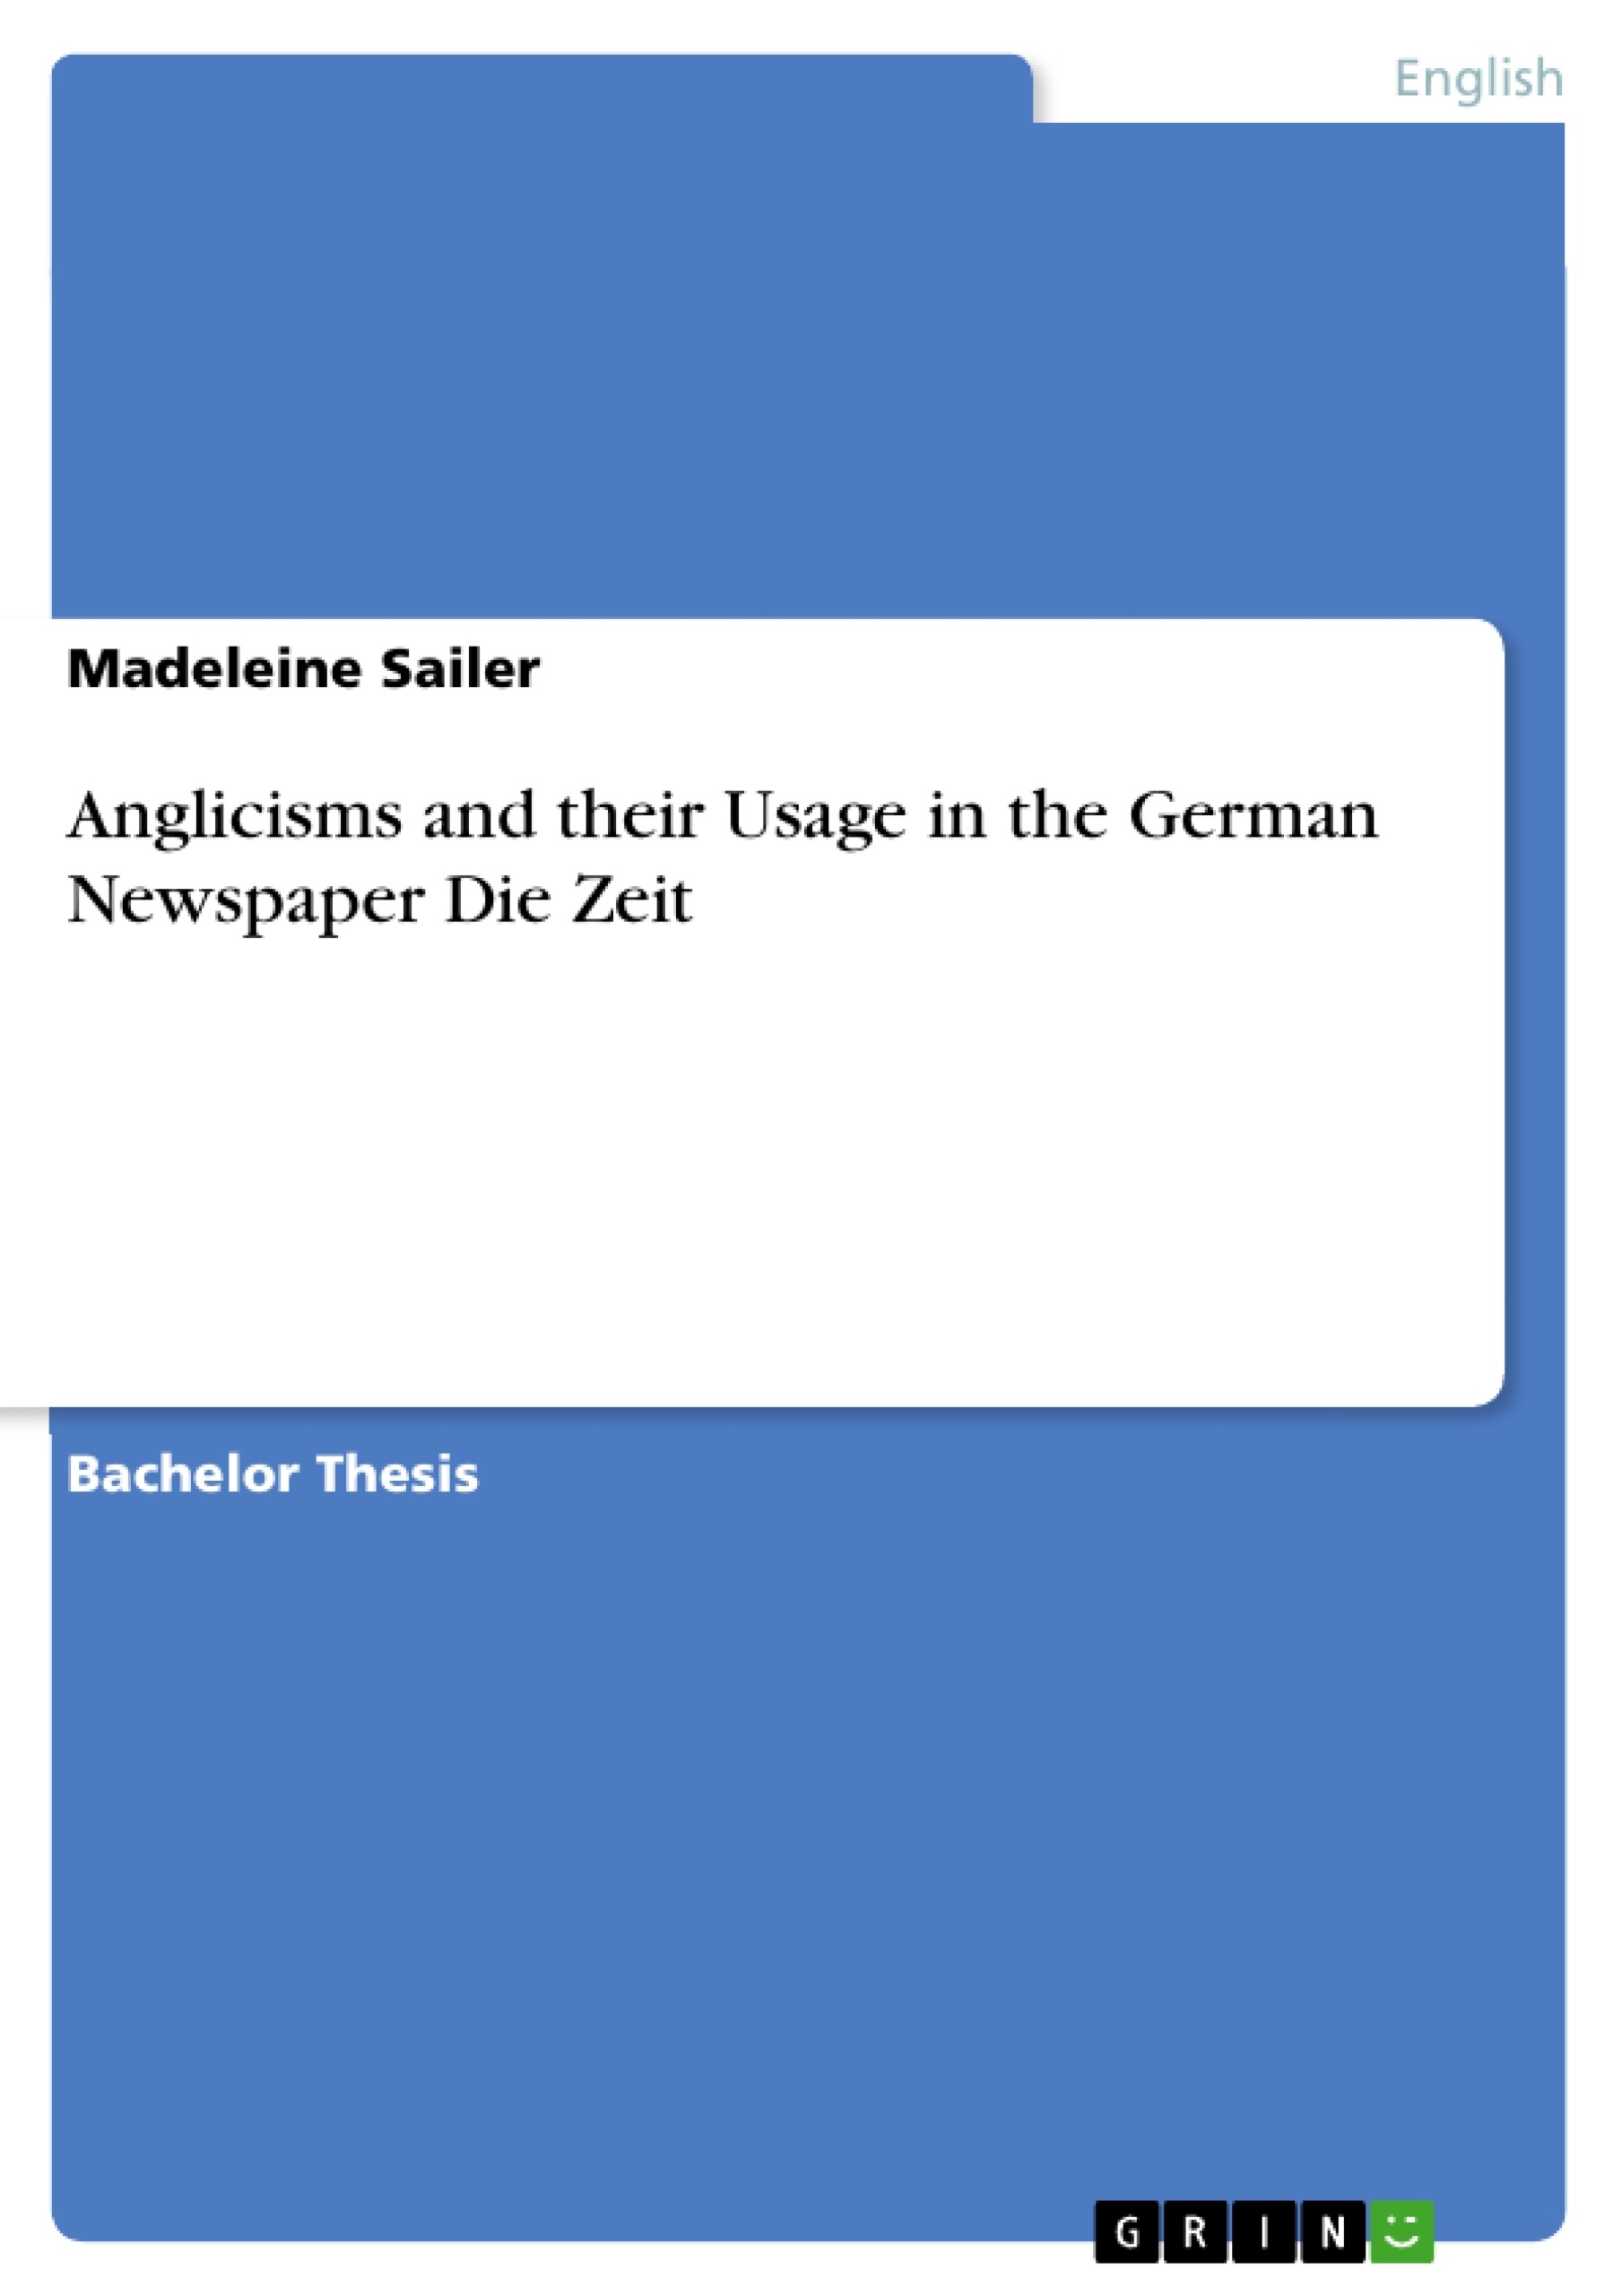 Title: Anglicisms and their Usage in the German Newspaper Die Zeit